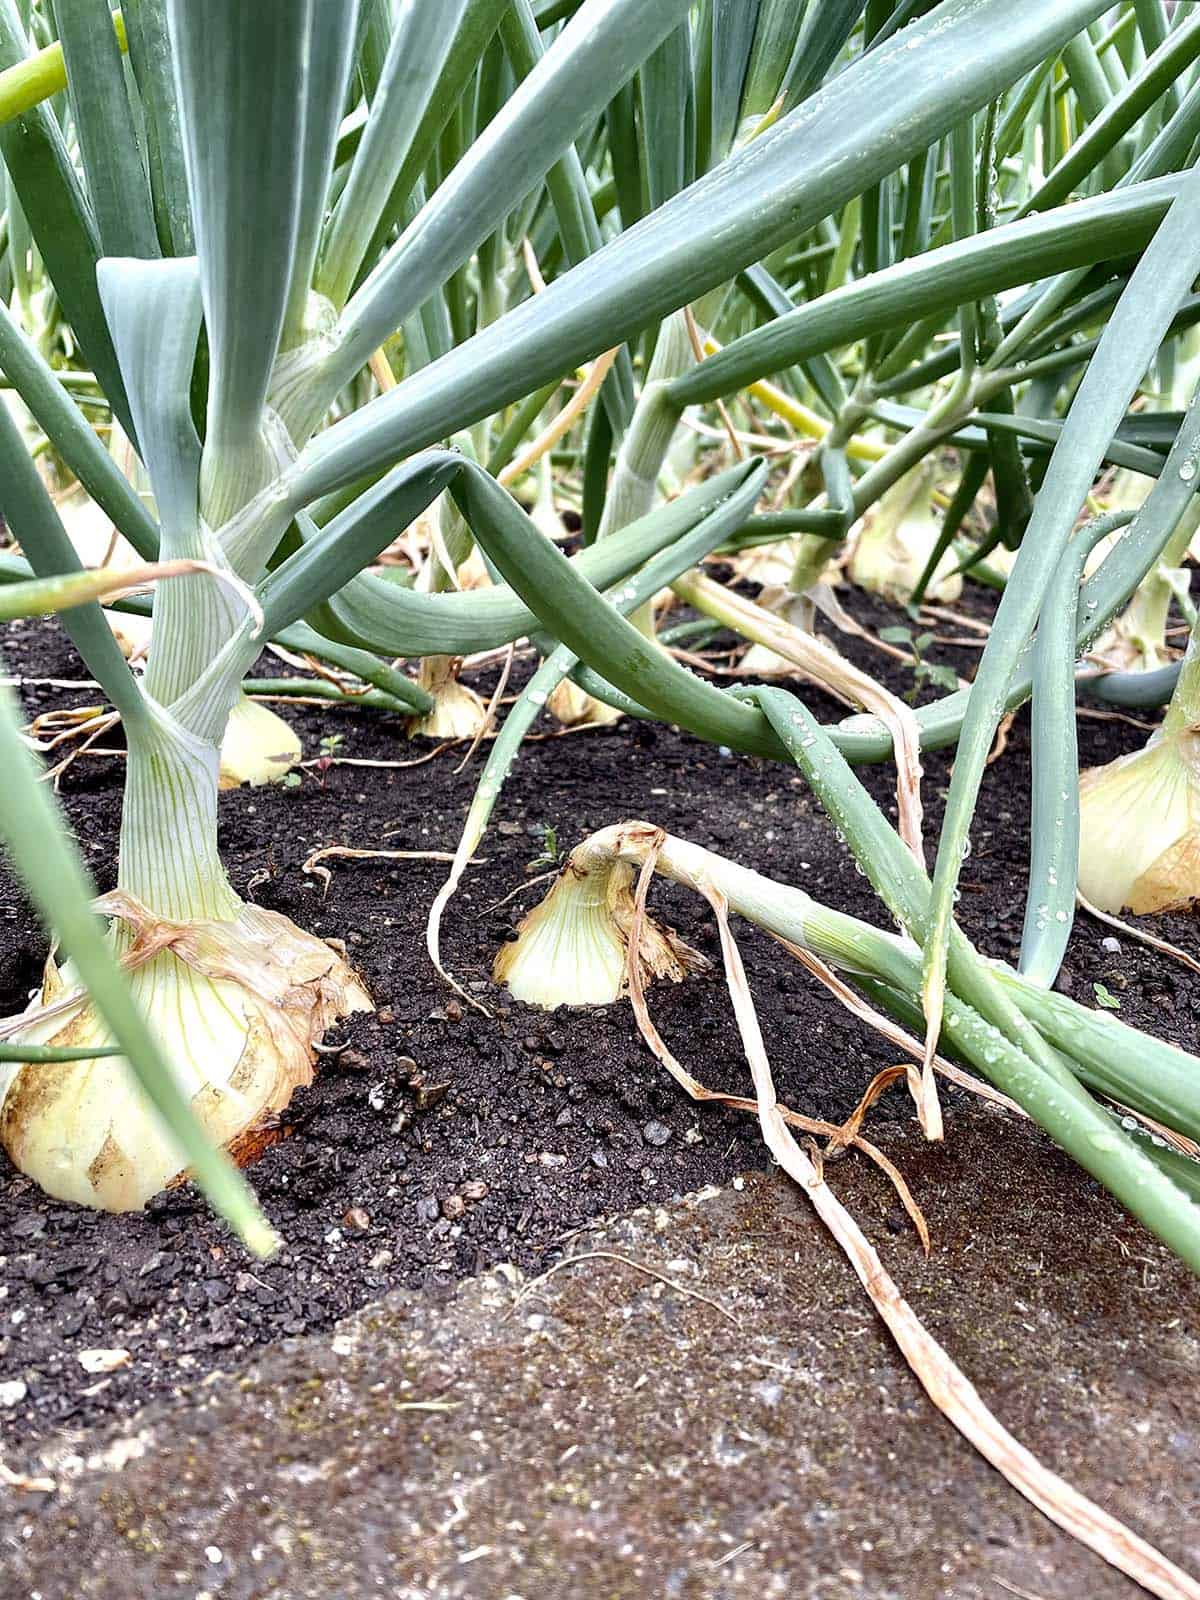 An onion stalk that has fallen over with the onion bulb in the ground.